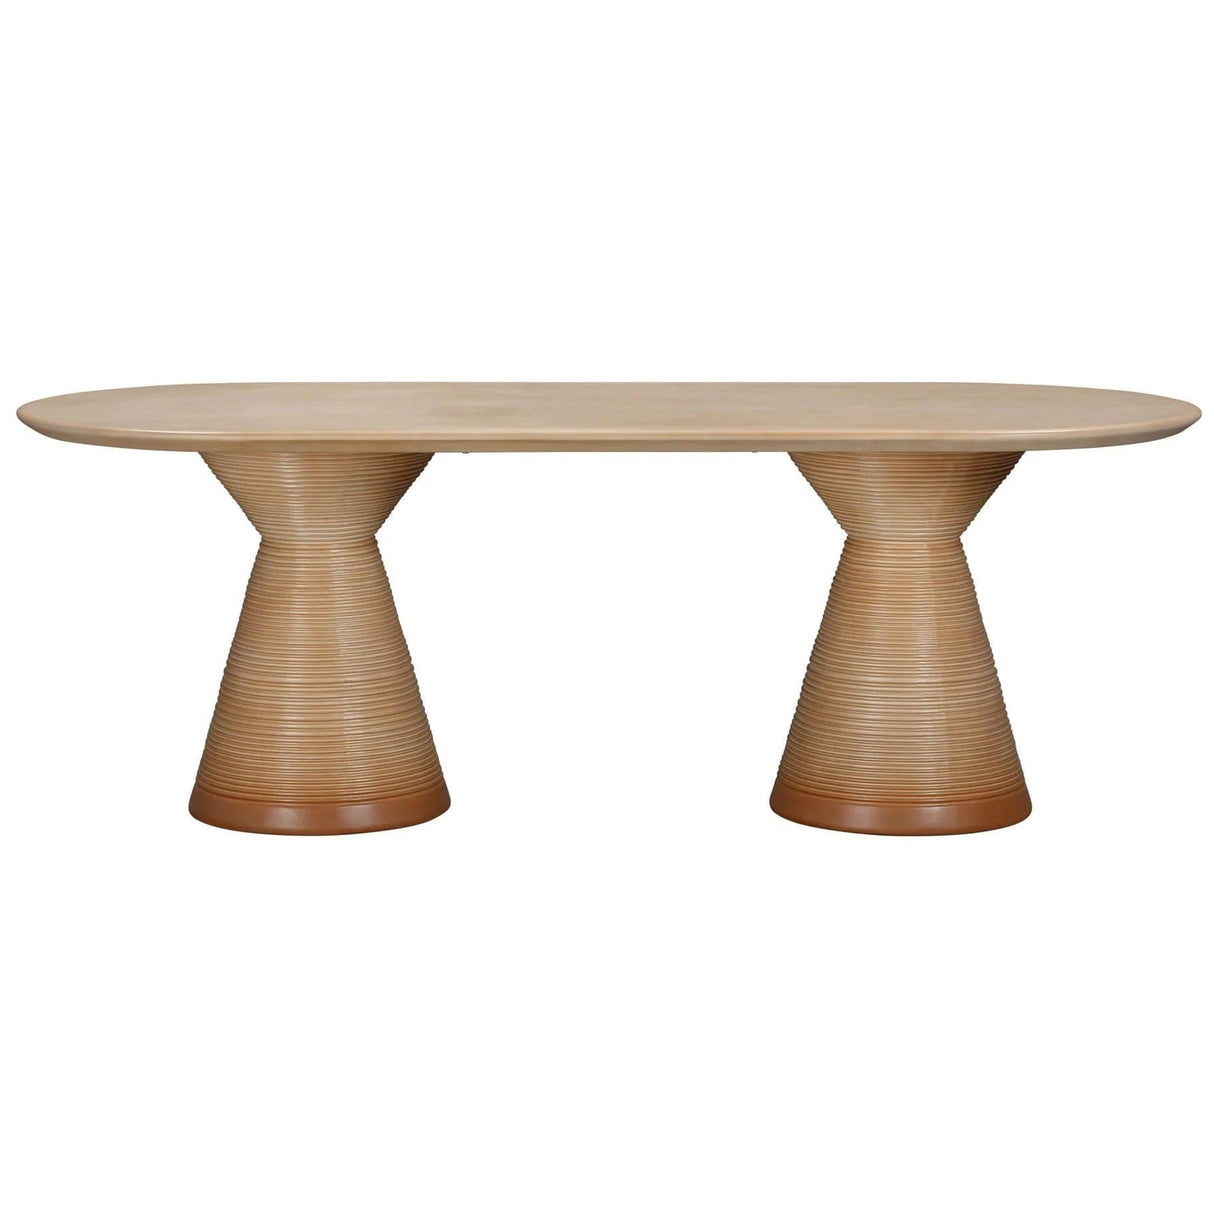 Candelabra Home Fassa Terracotta Indoor/Outdoor Dining Table Dining Tables TOV-O54280